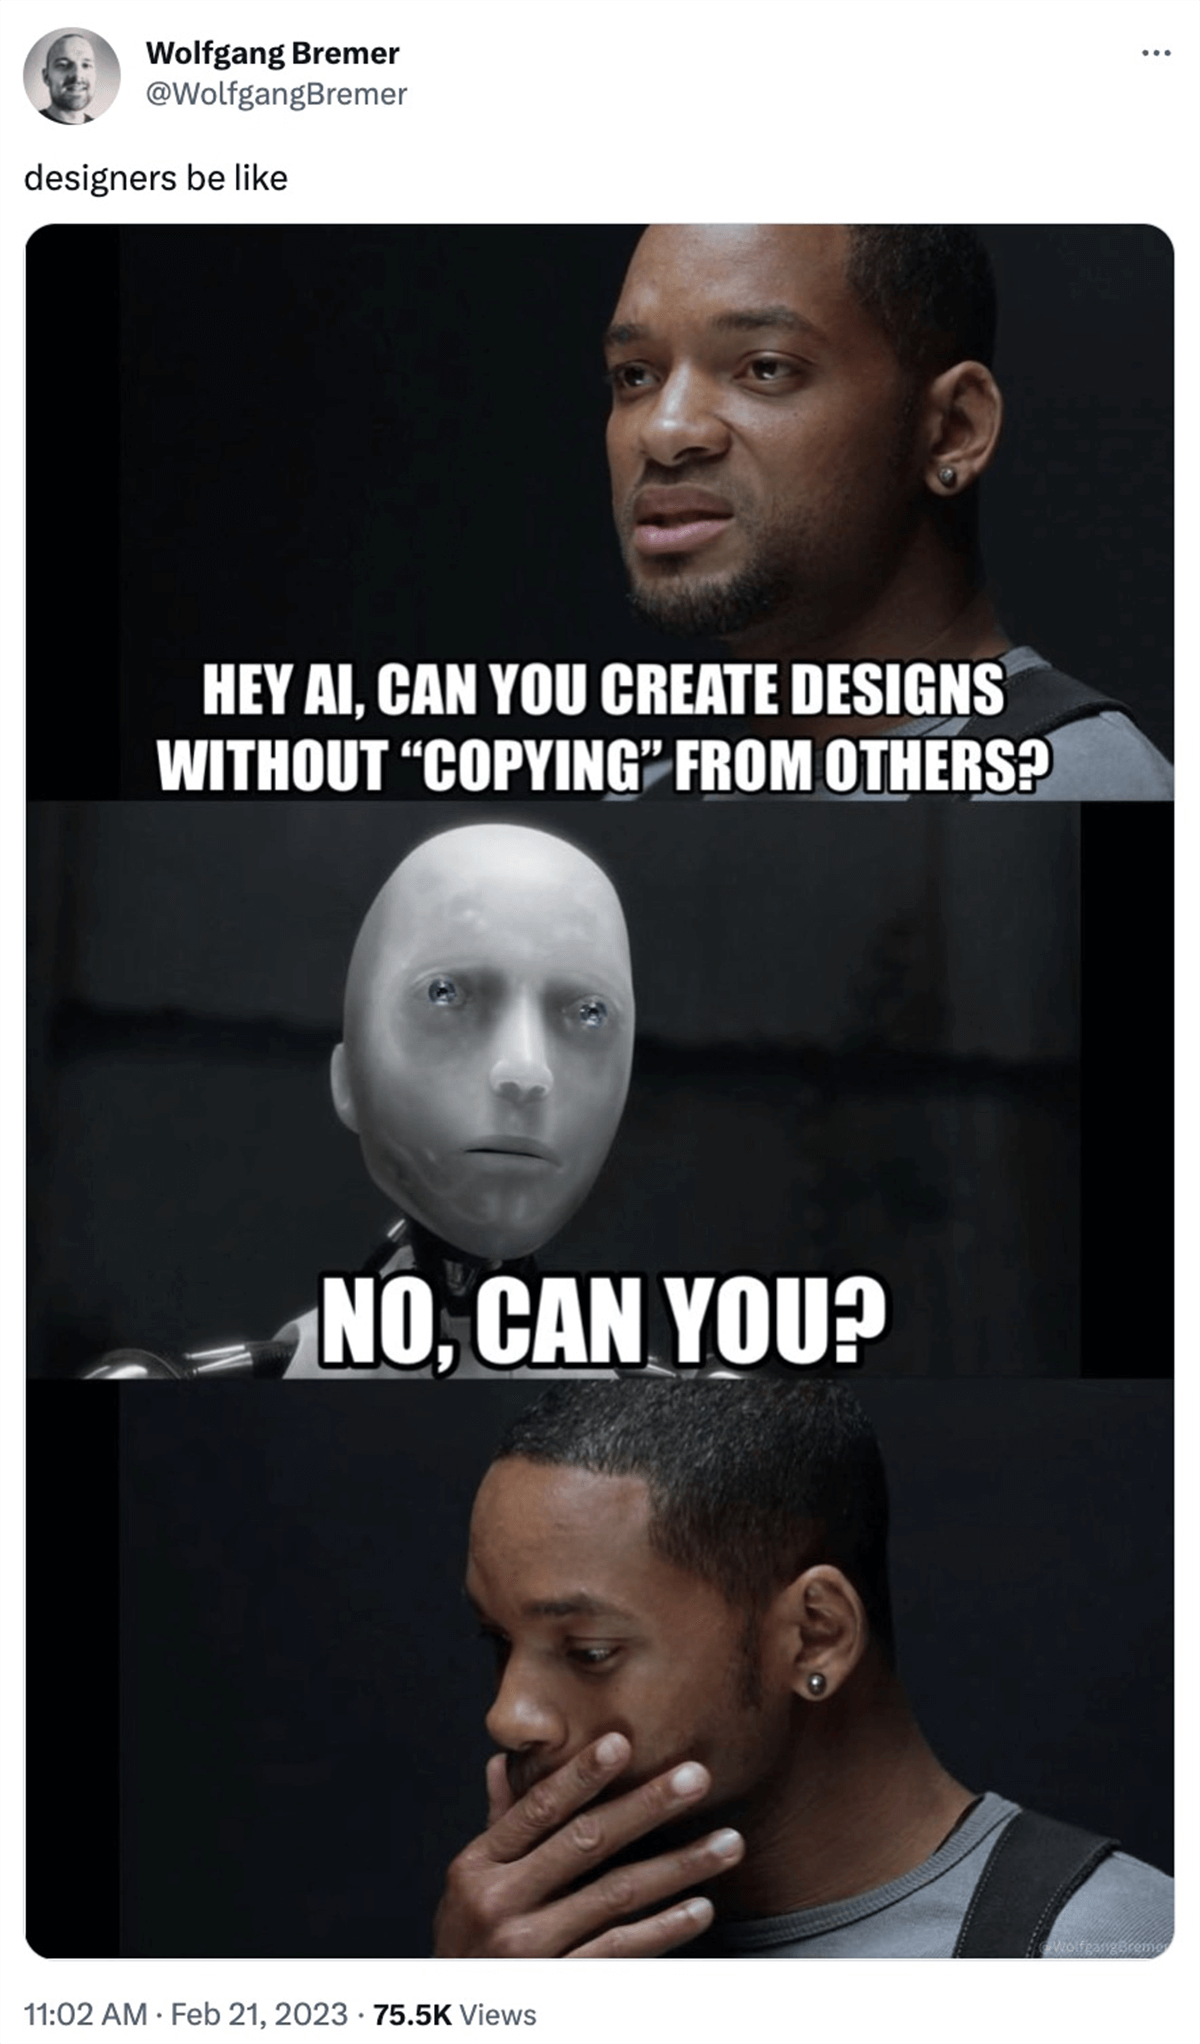 @WolfgangBremer on twitter: designers be like - Will Smith from I, Robot saying Hey AI, can you create designs without Copying from others? the robot responding no, can you?